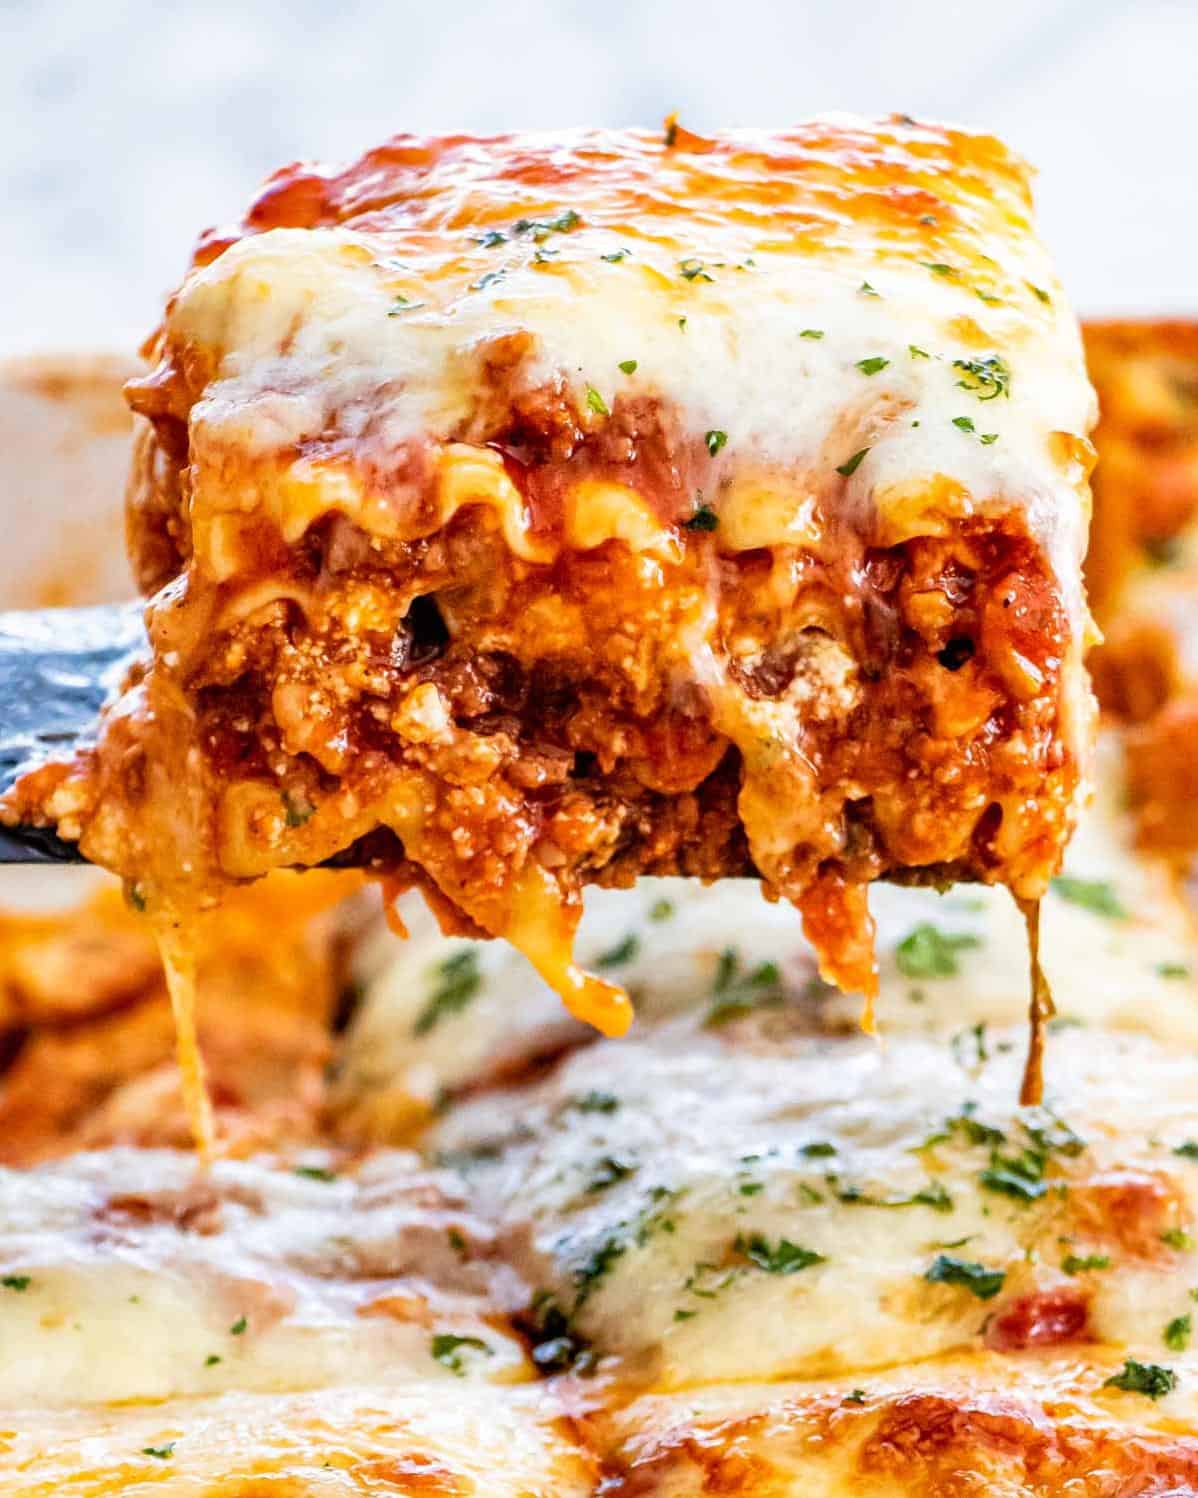  This lasagna is so good, you won't even miss the meat.